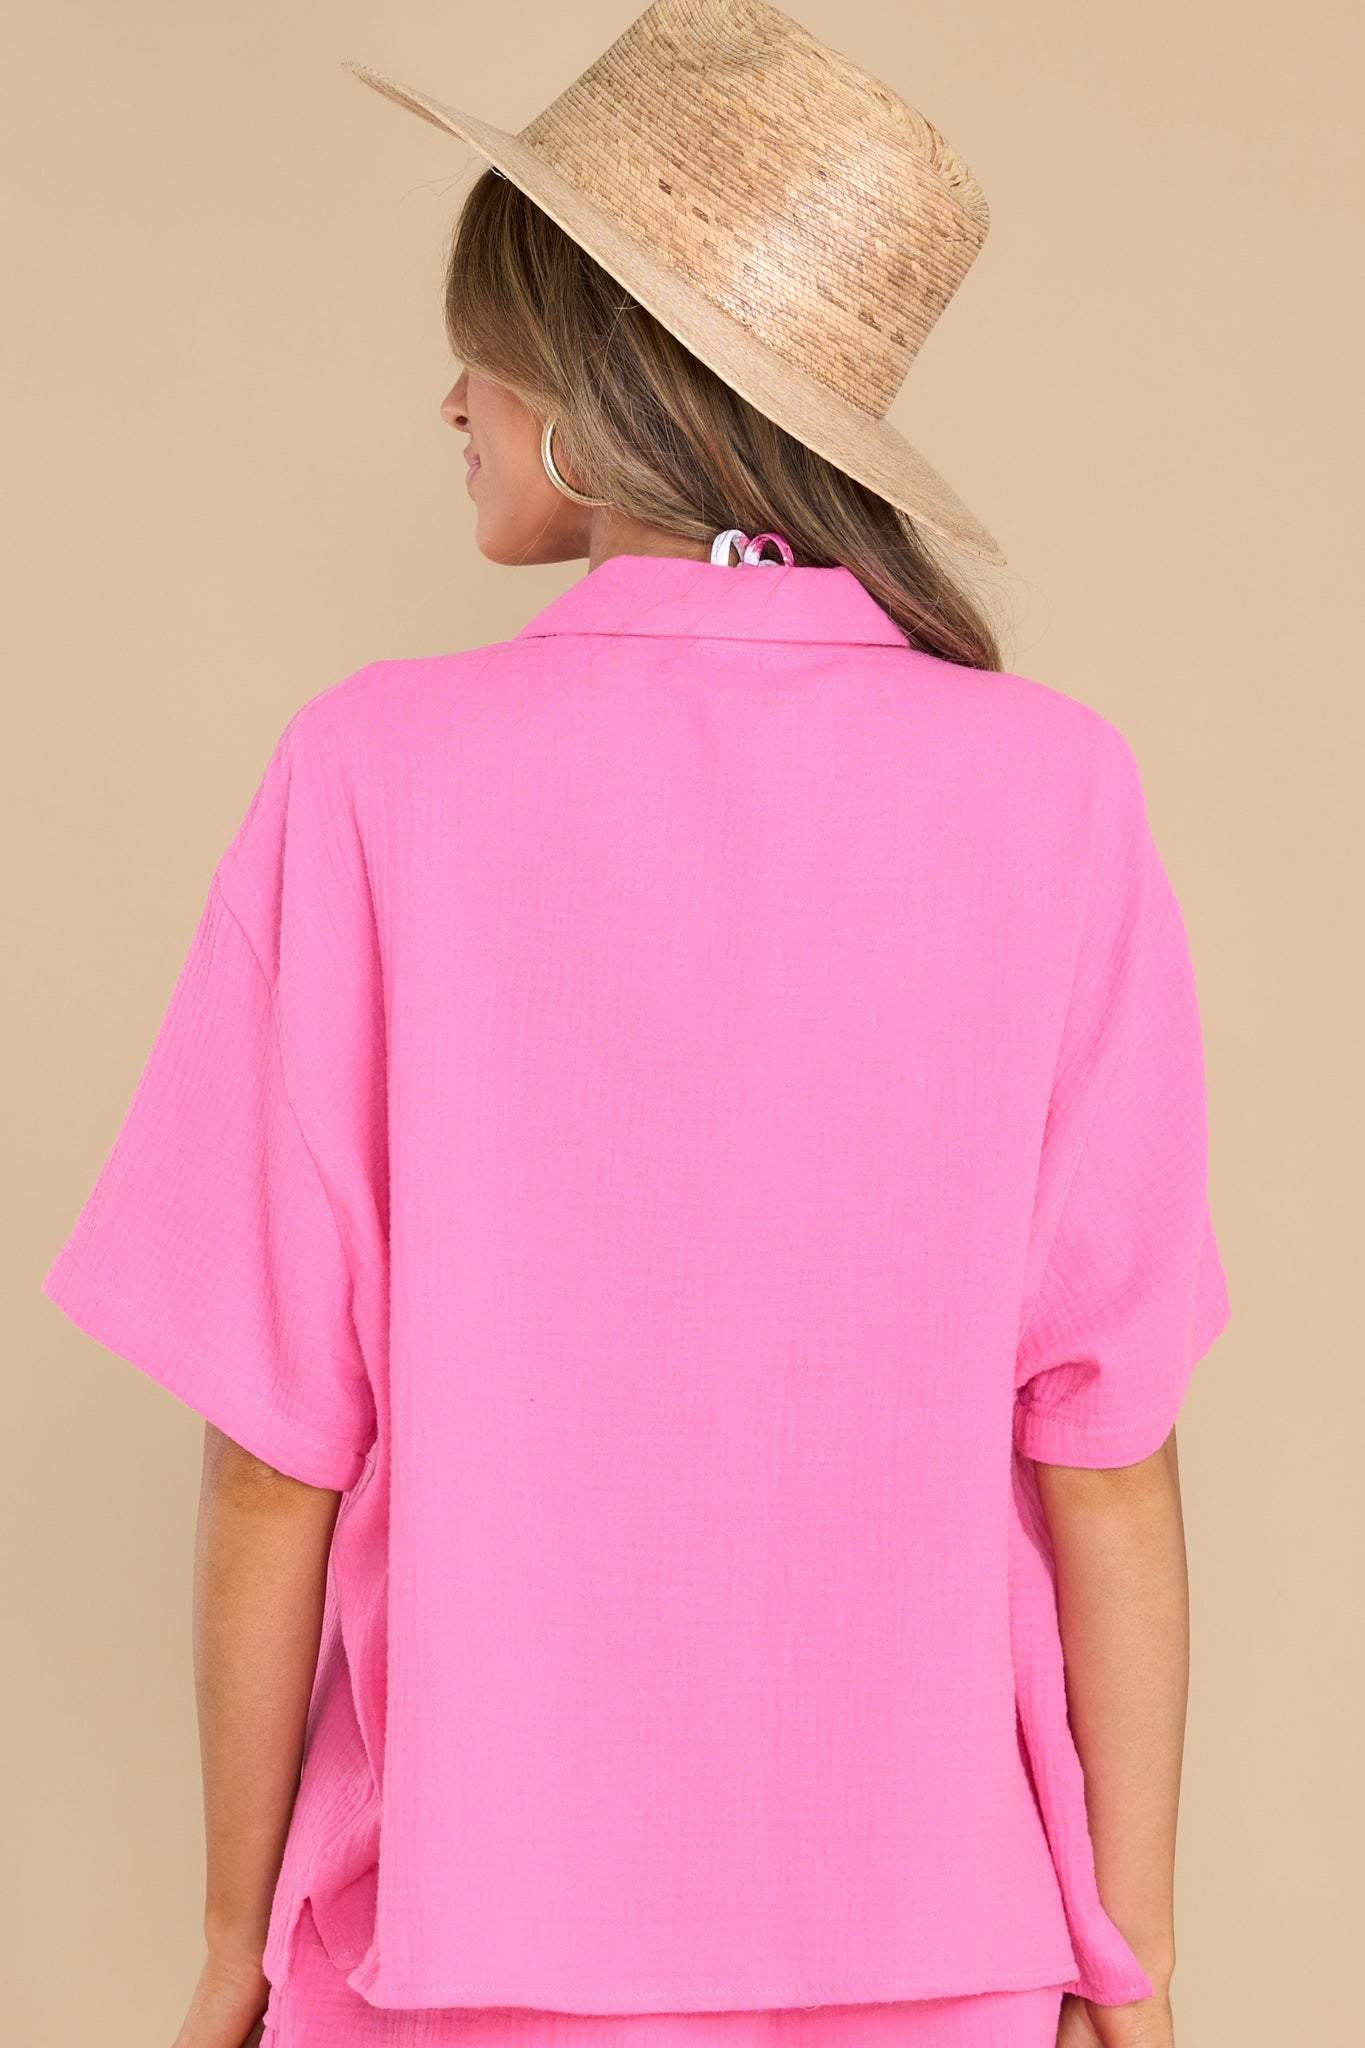 The Brightest Days Pink Gauze Top - Red Dress